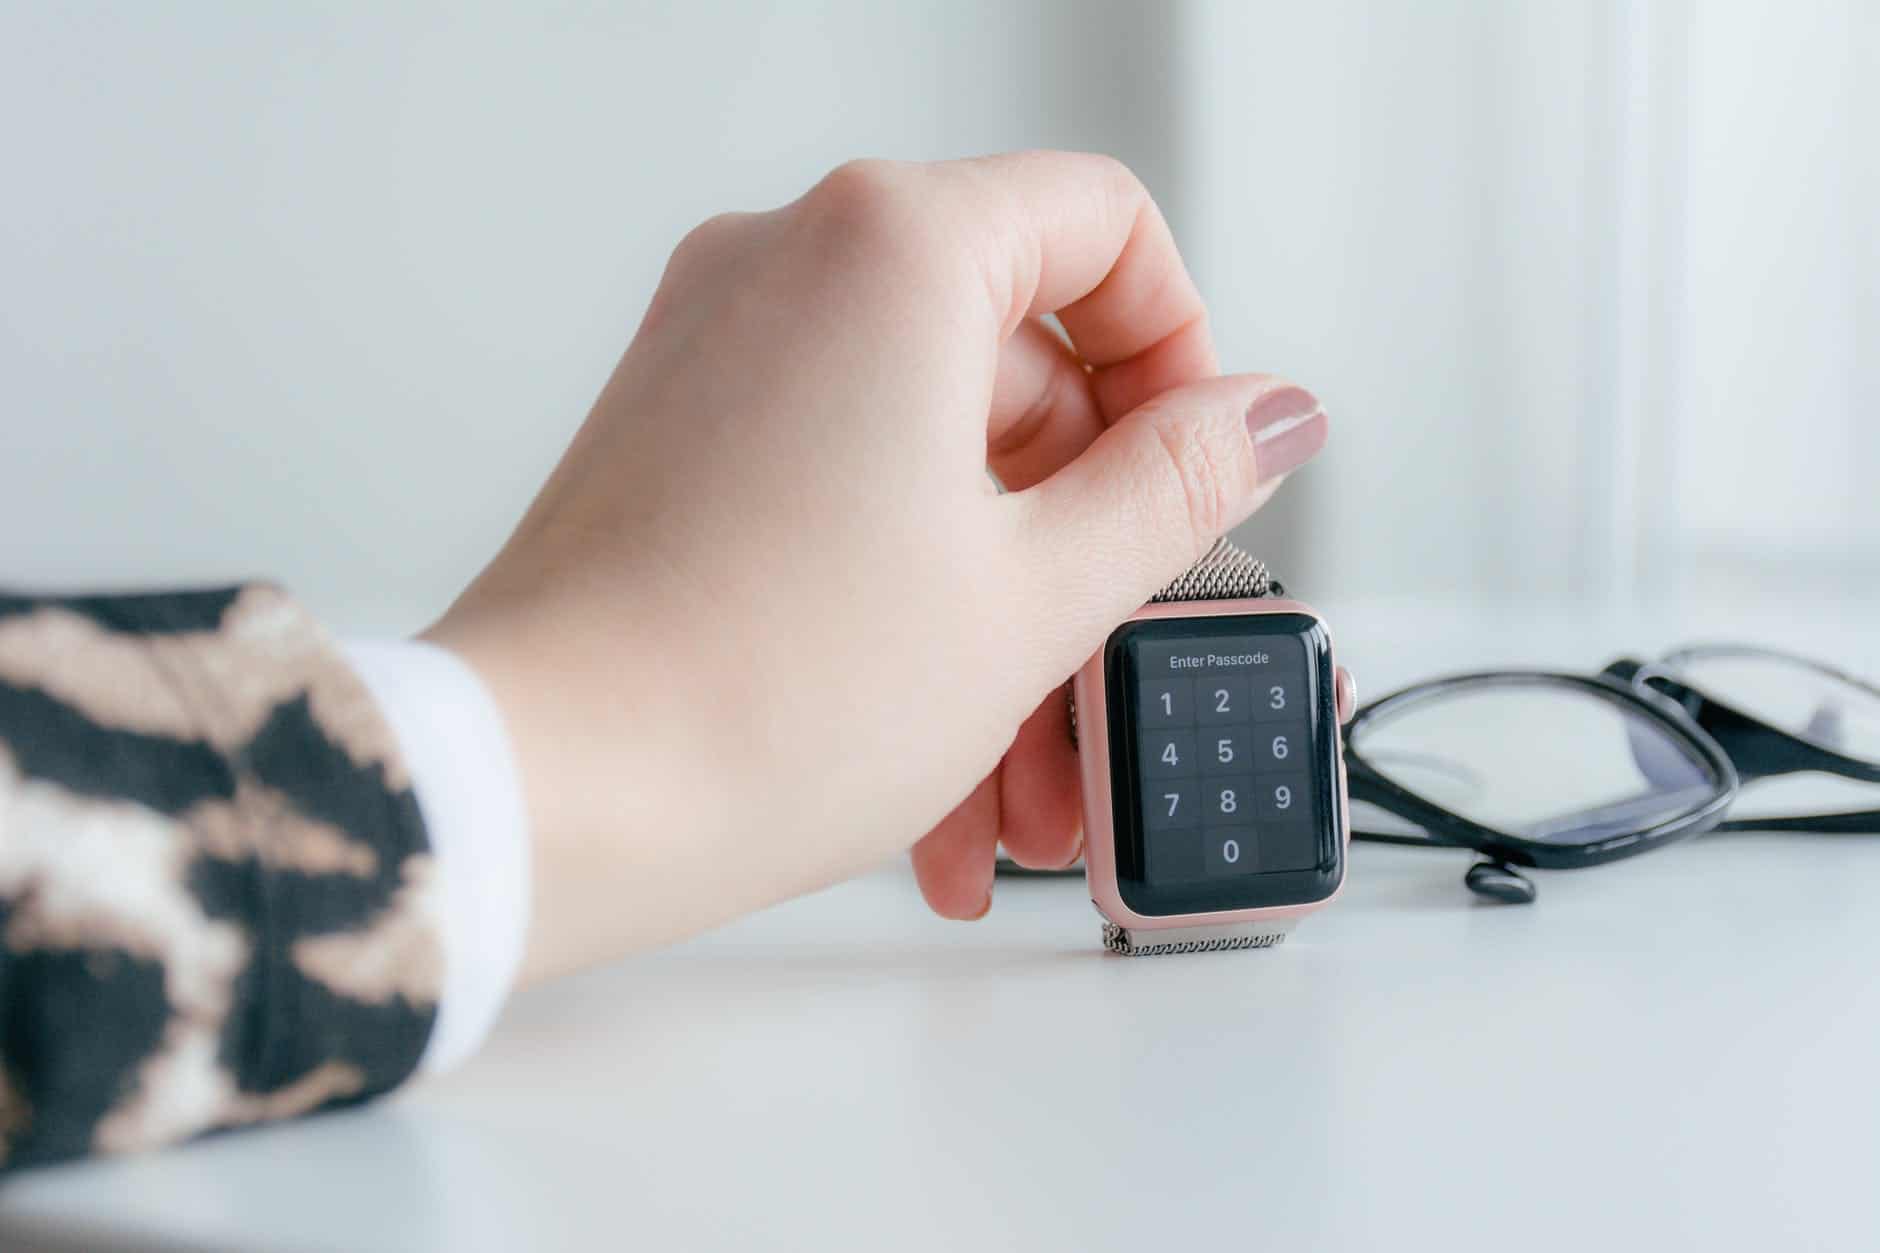 why my apple watch is keeping asking for a passcode - how to fix it